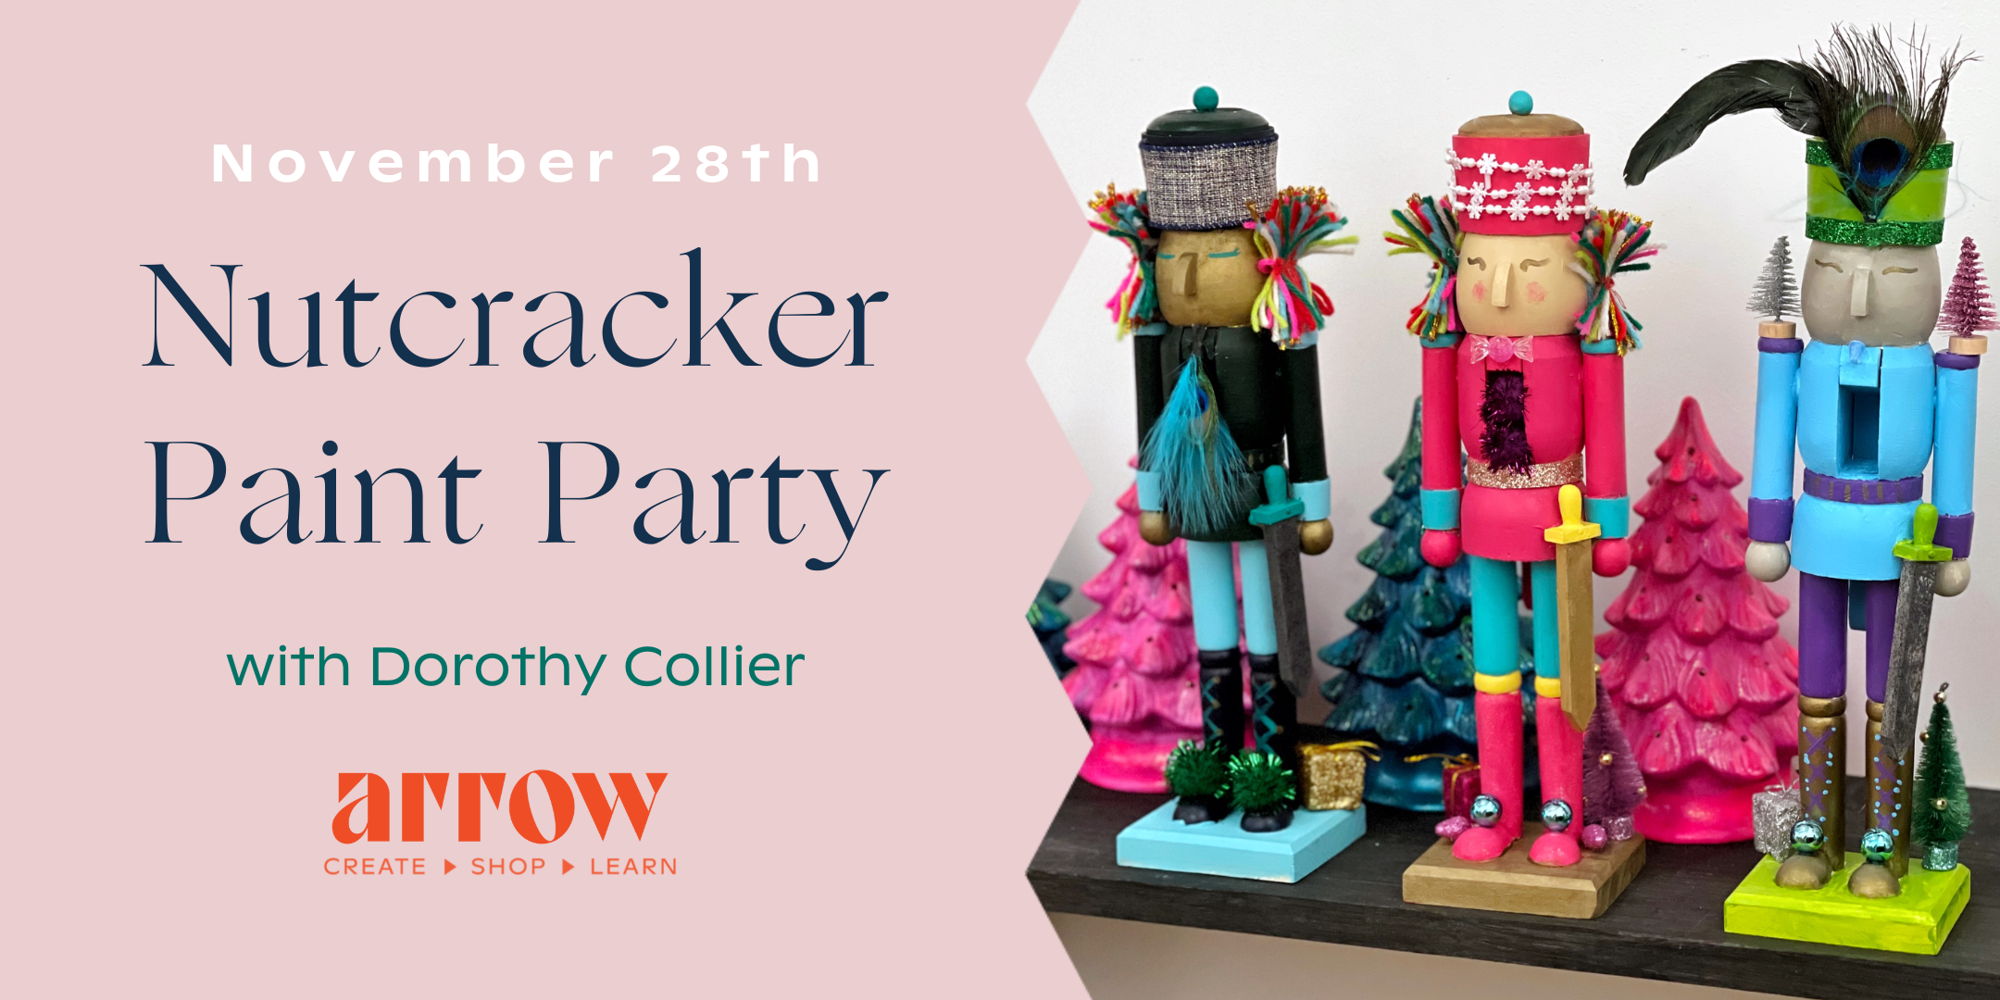 Nutcracker Paint Party with Dorothy Collier promotional image